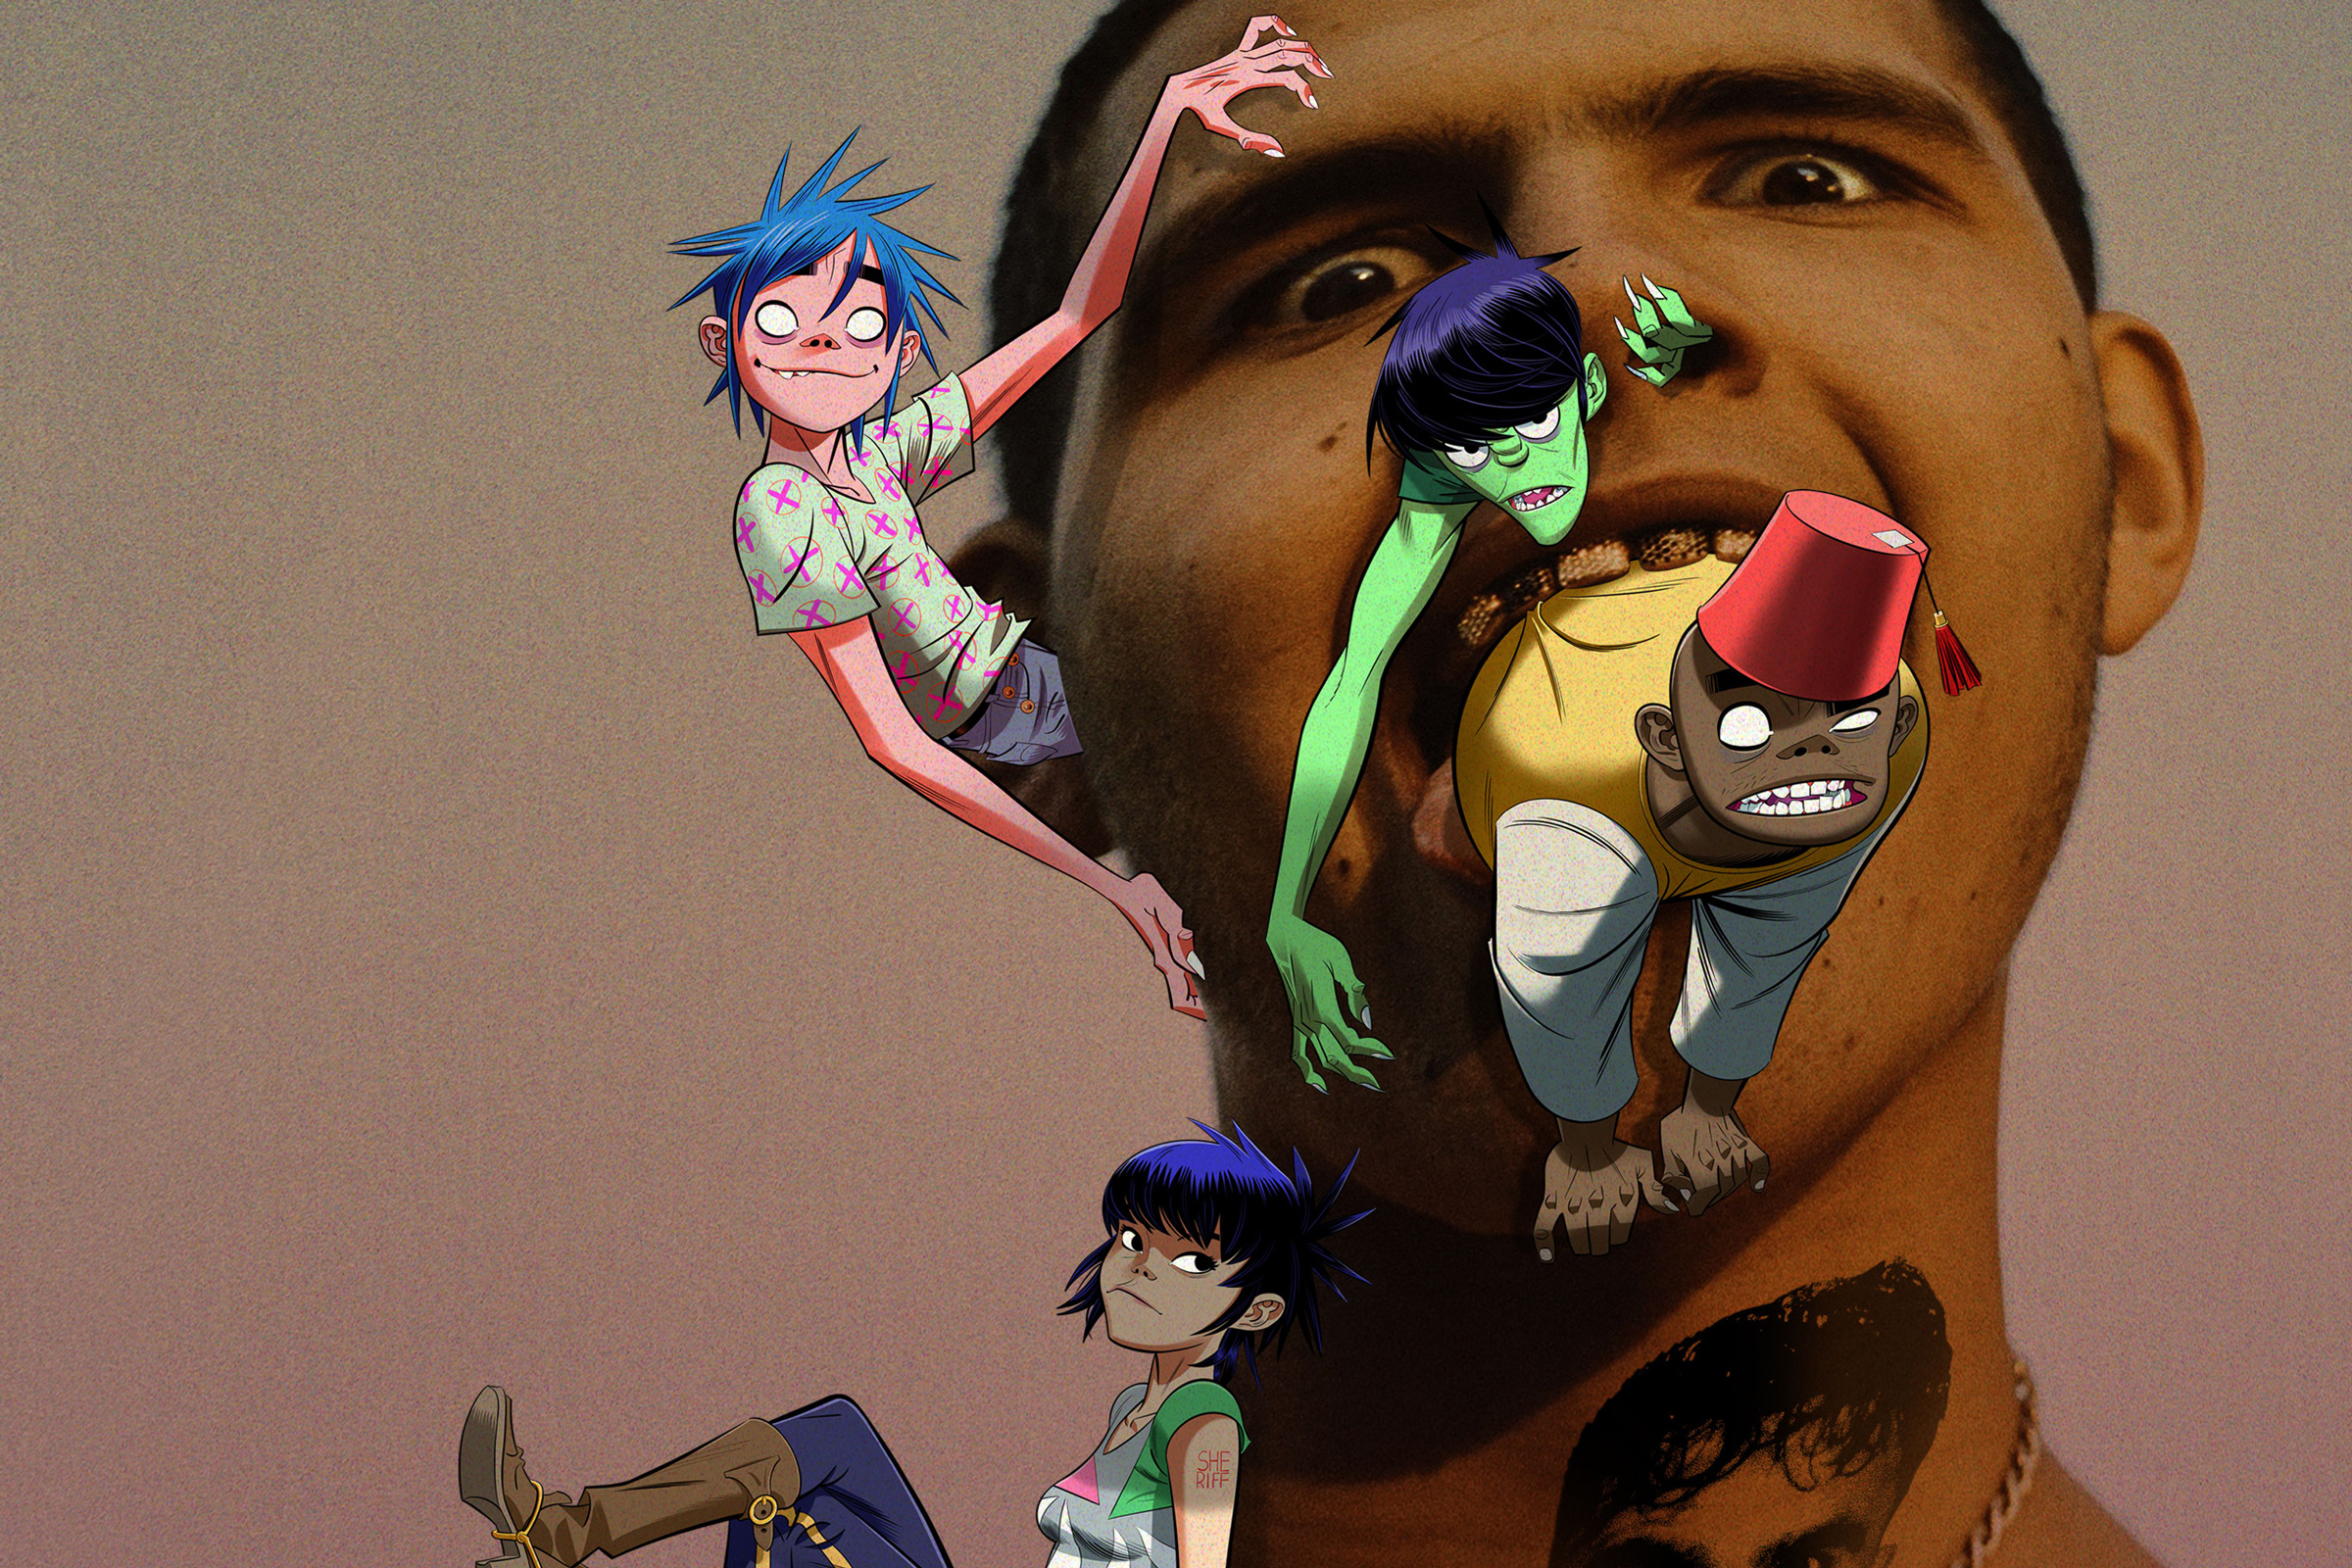 Gorillaz: Momentary Bliss, A song featuring British rapper Slowthai and the Kent-based punk rock duo Slaves. 2400x1600 HD Wallpaper.